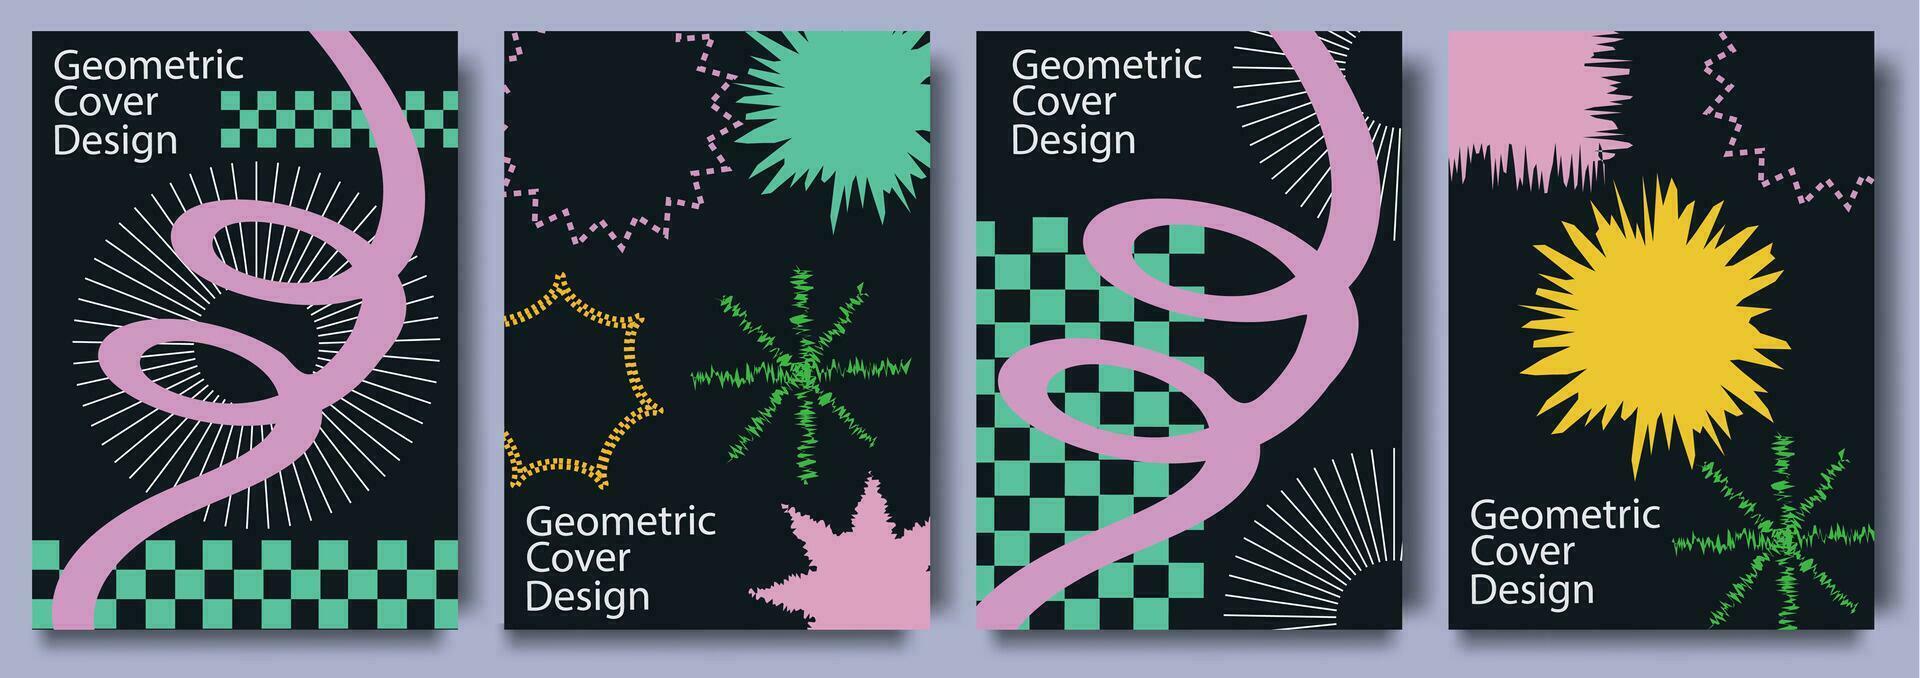 Creative covers, layouts or posters concept in modern minimal style for corporate identity, branding, social media advertising, promo. Trendy geometric design templates vector